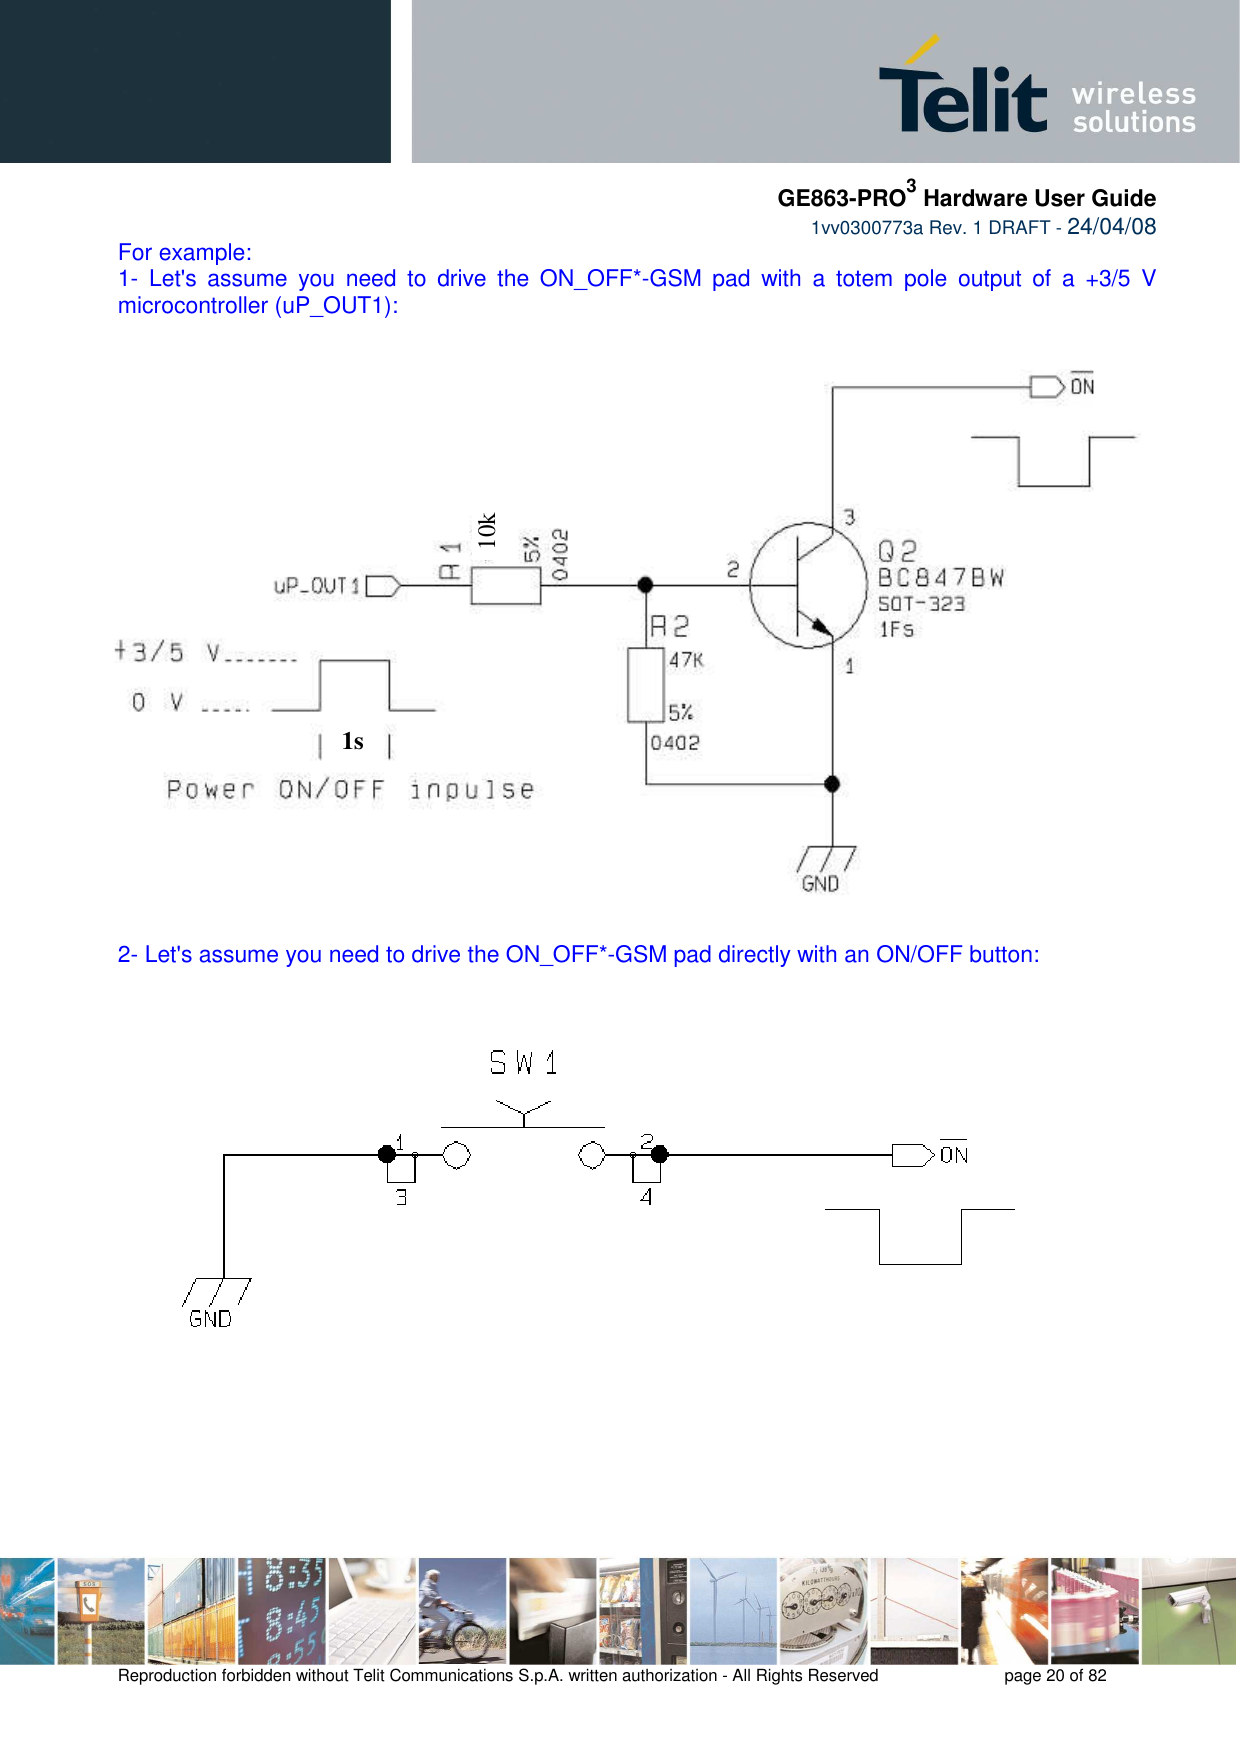     GE863-PRO3 Hardware User Guide  1vv0300773a Rev. 1 DRAFT - 24/04/08    Reproduction forbidden without Telit Communications S.p.A. written authorization - All Rights Reserved    page 20 of 82  For example: 1-  Let&apos;s  assume  you  need  to  drive  the  ON_OFF*-GSM  pad  with  a  totem  pole  output  of  a  +3/5  V microcontroller (uP_OUT1):   2- Let&apos;s assume you need to drive the ON_OFF*-GSM pad directly with an ON/OFF button:    1s 10k 